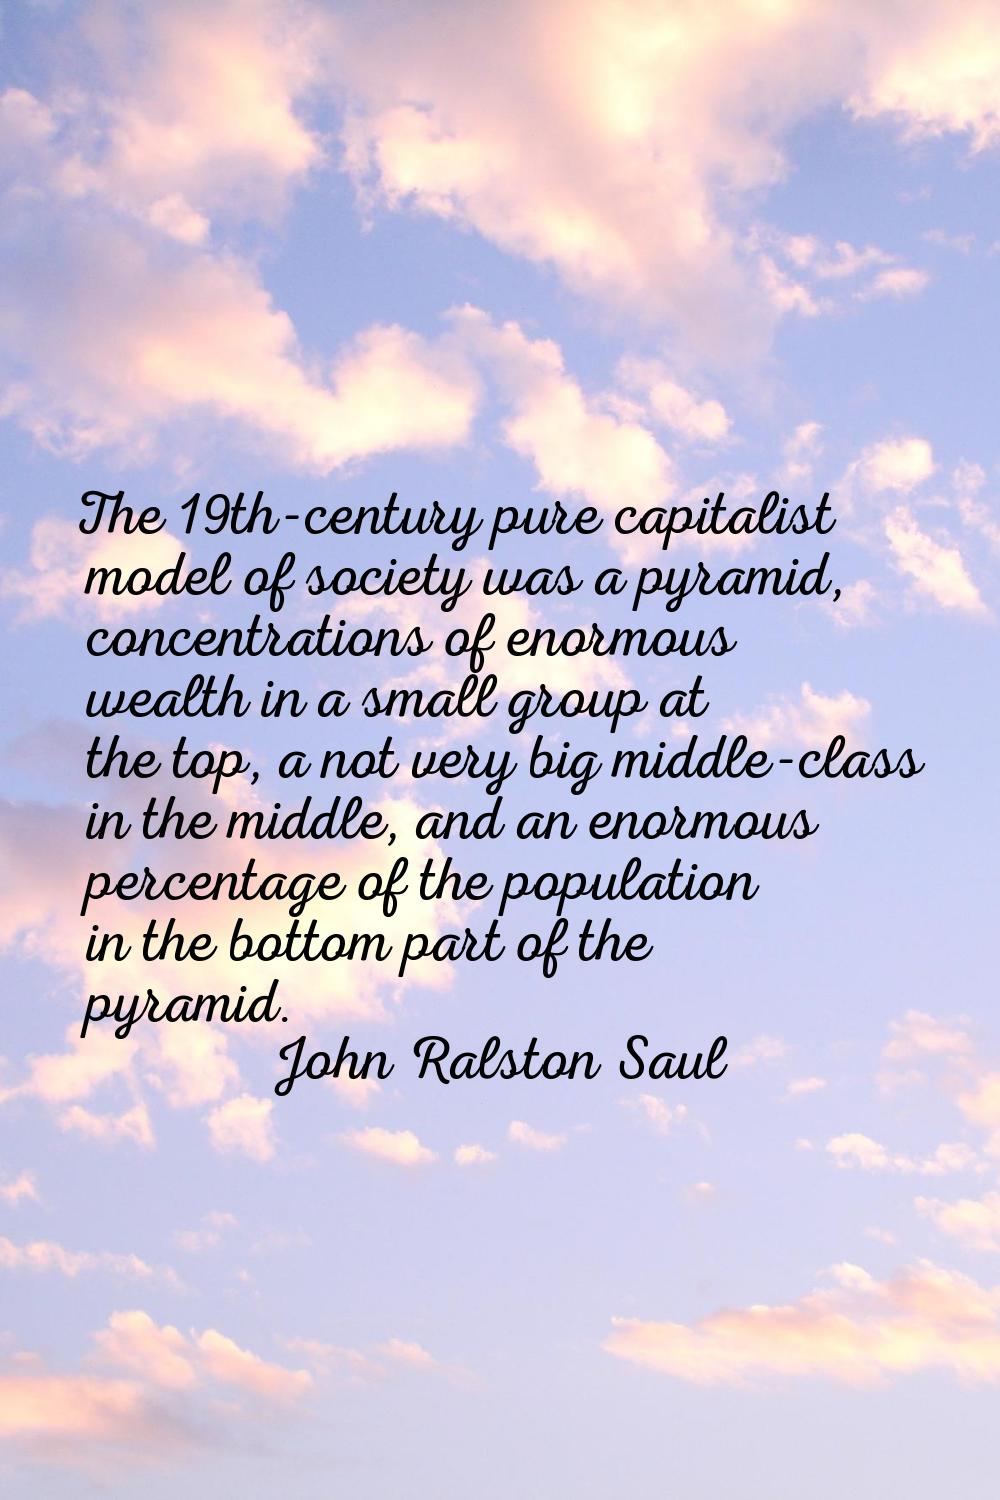 The 19th-century pure capitalist model of society was a pyramid, concentrations of enormous wealth 